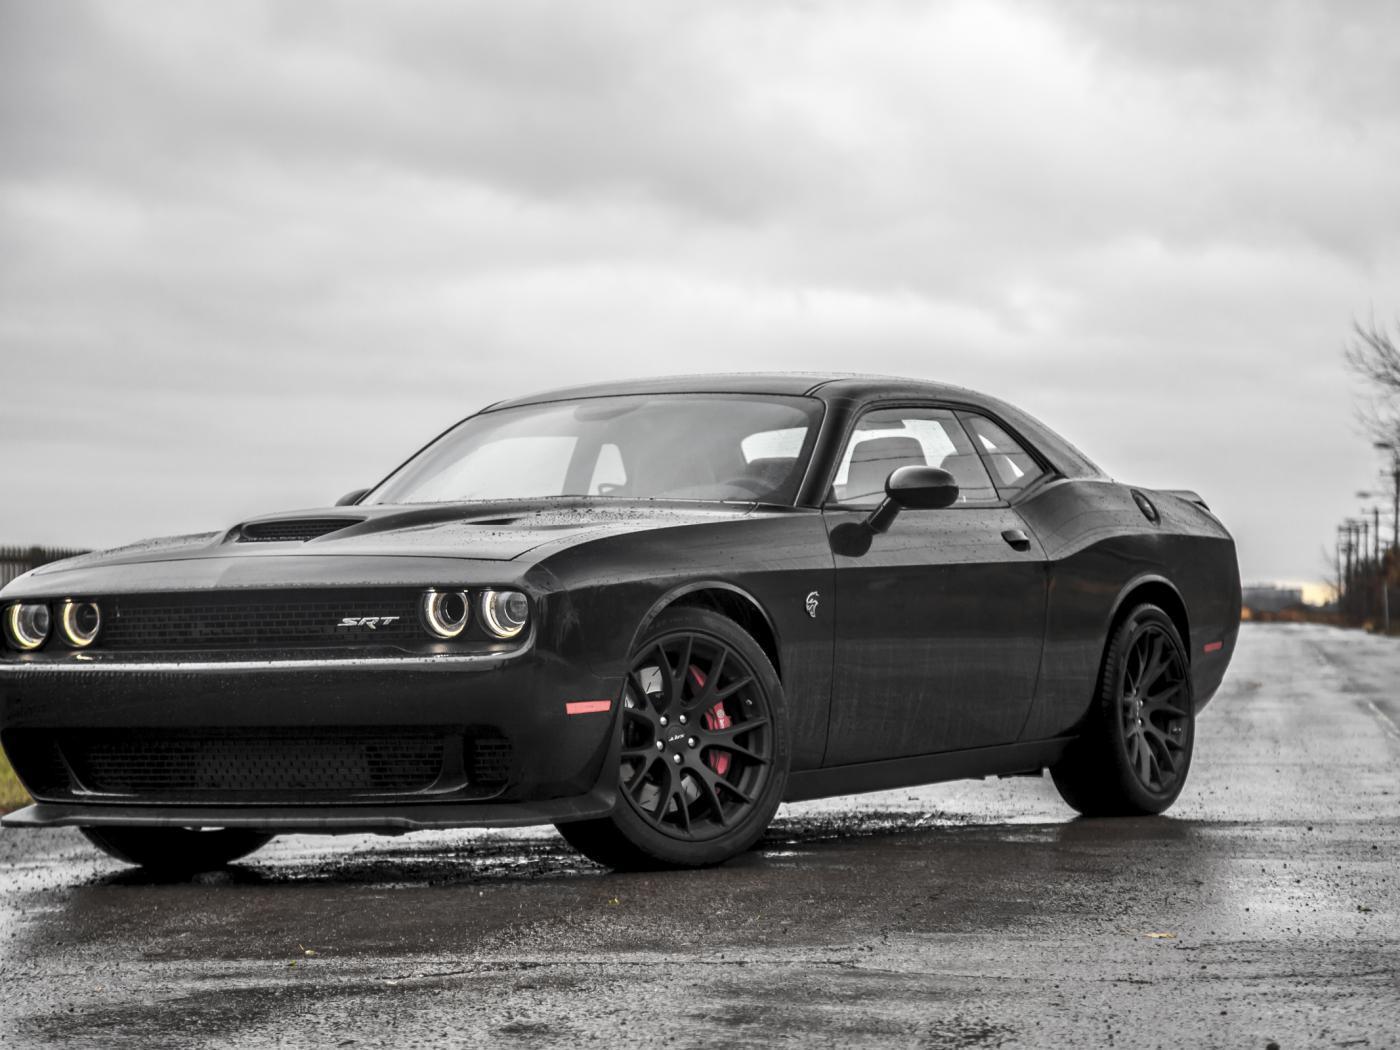 Dodge Challenger Hellcat Specs And Picture For Wallpaper. New Car